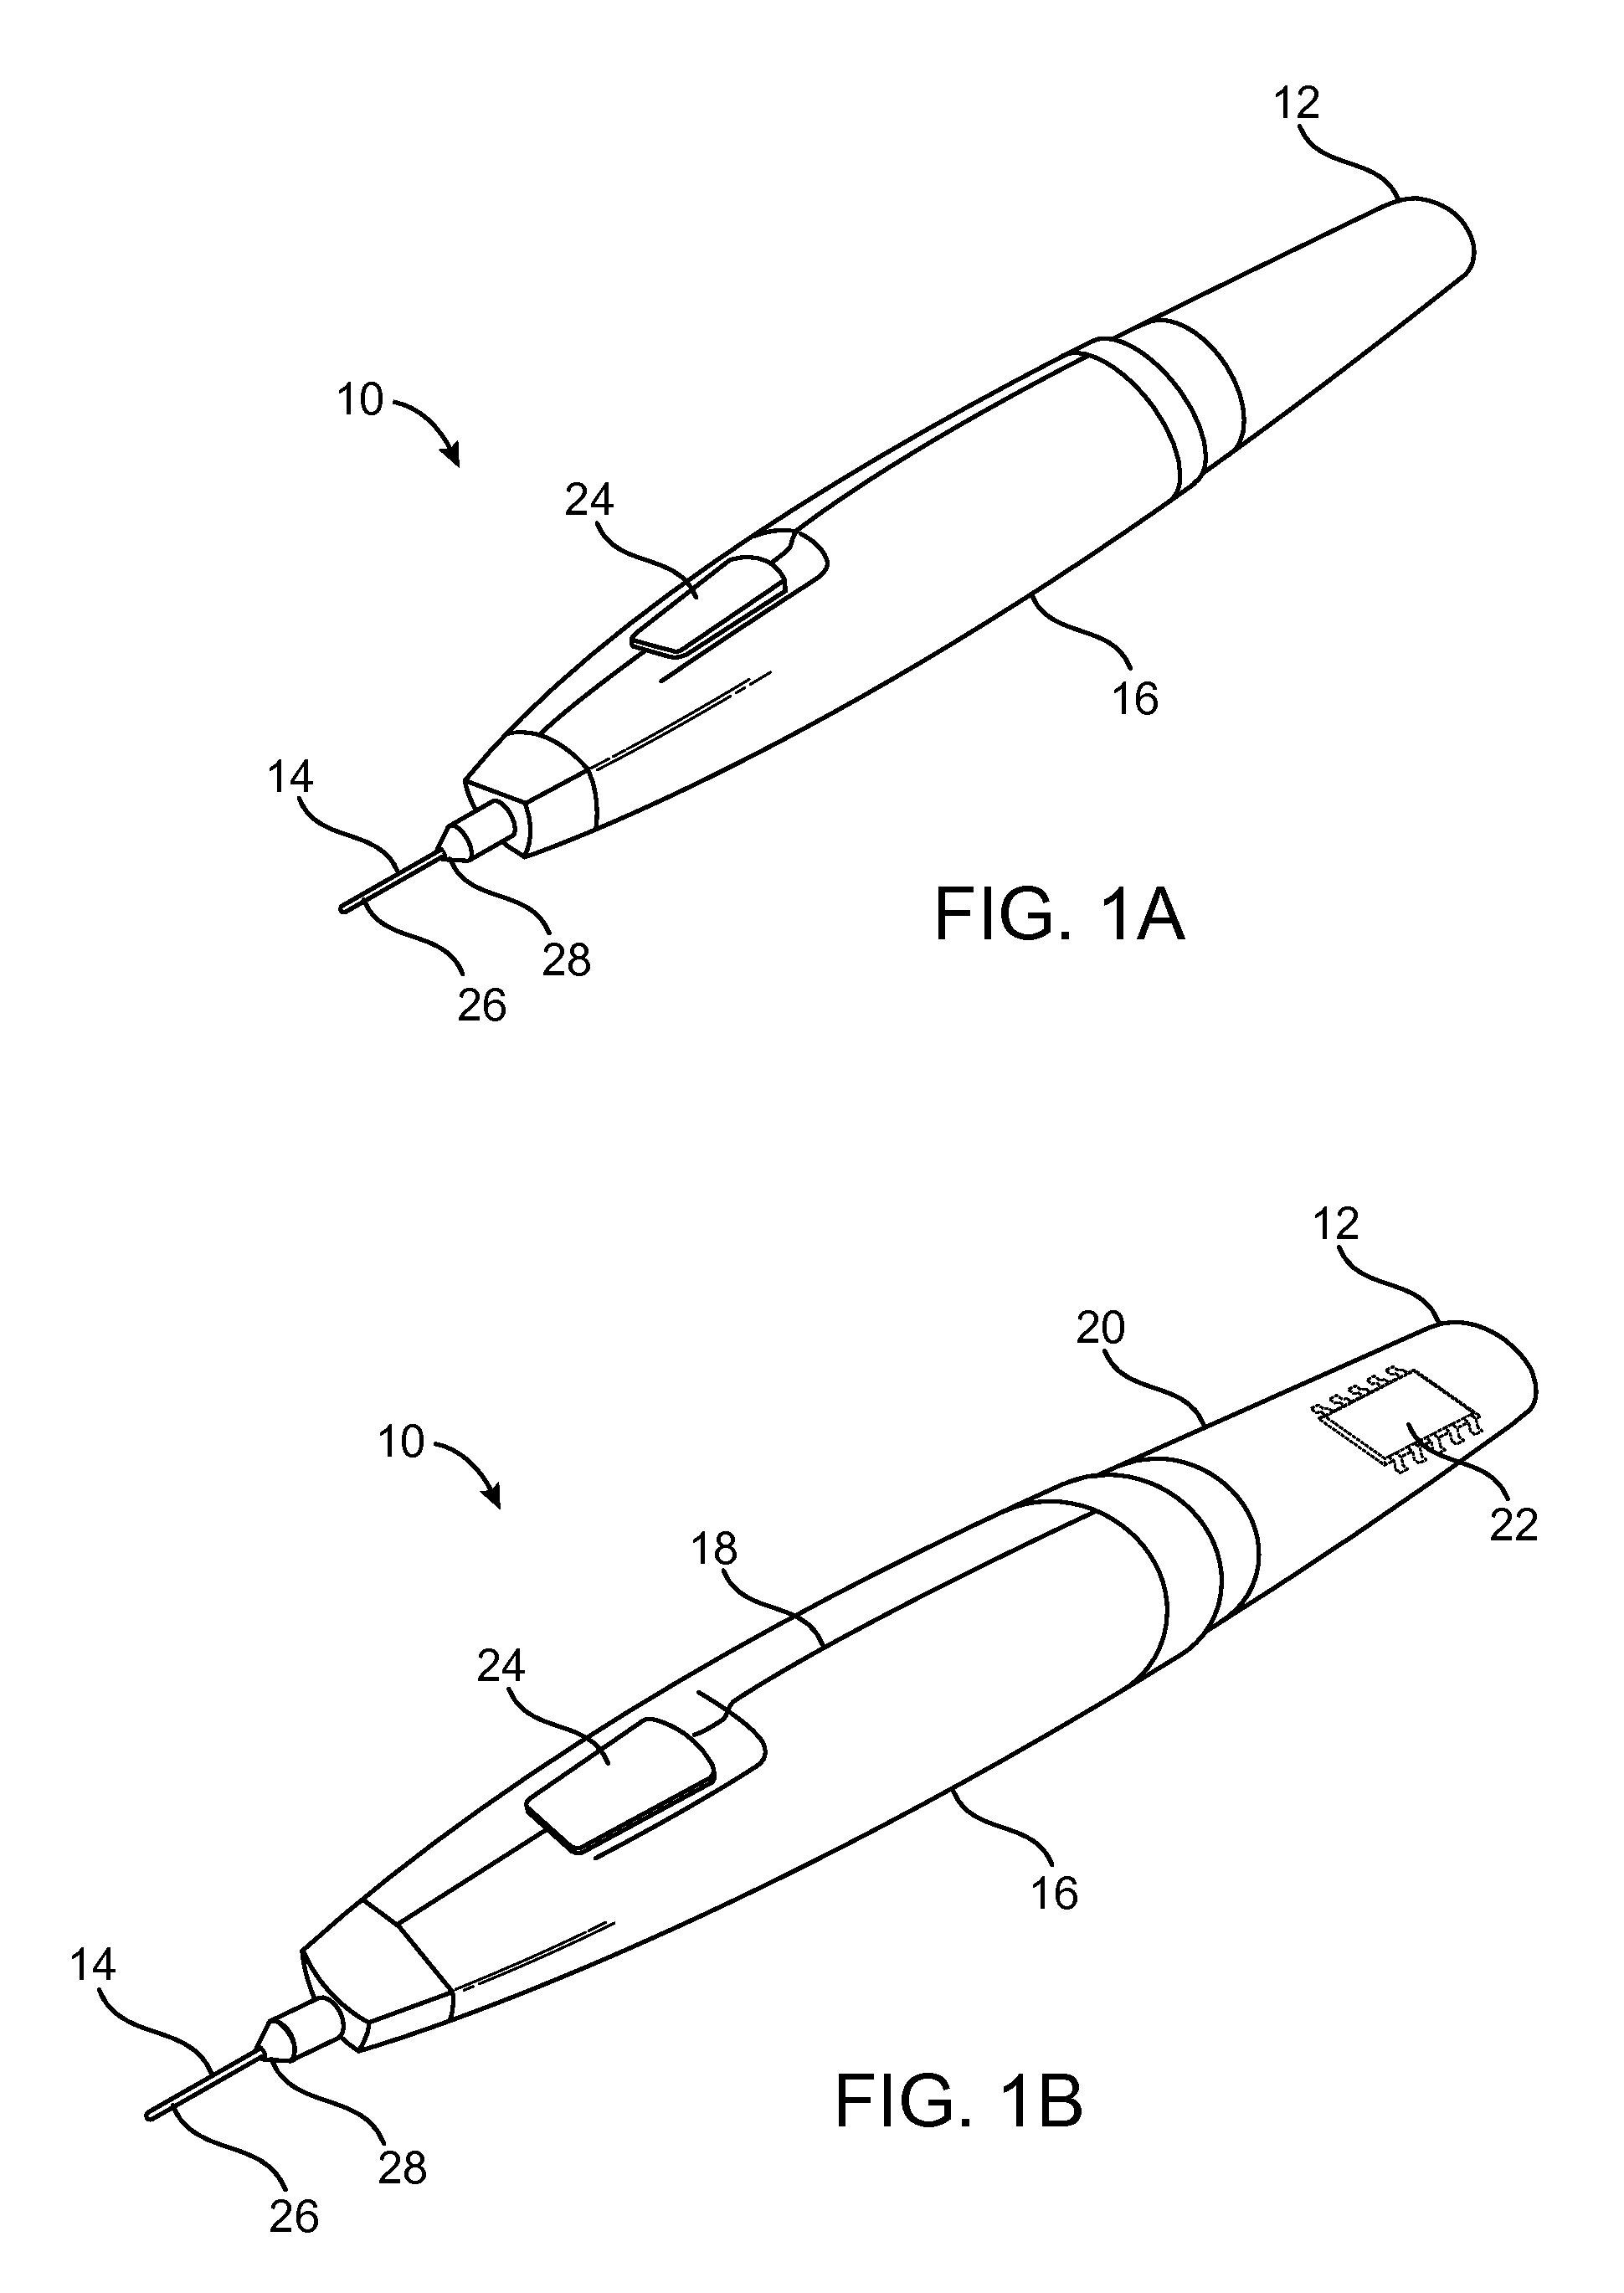 Methods and apparatus for cryogenically treating multiple tissue sites with a single puncture